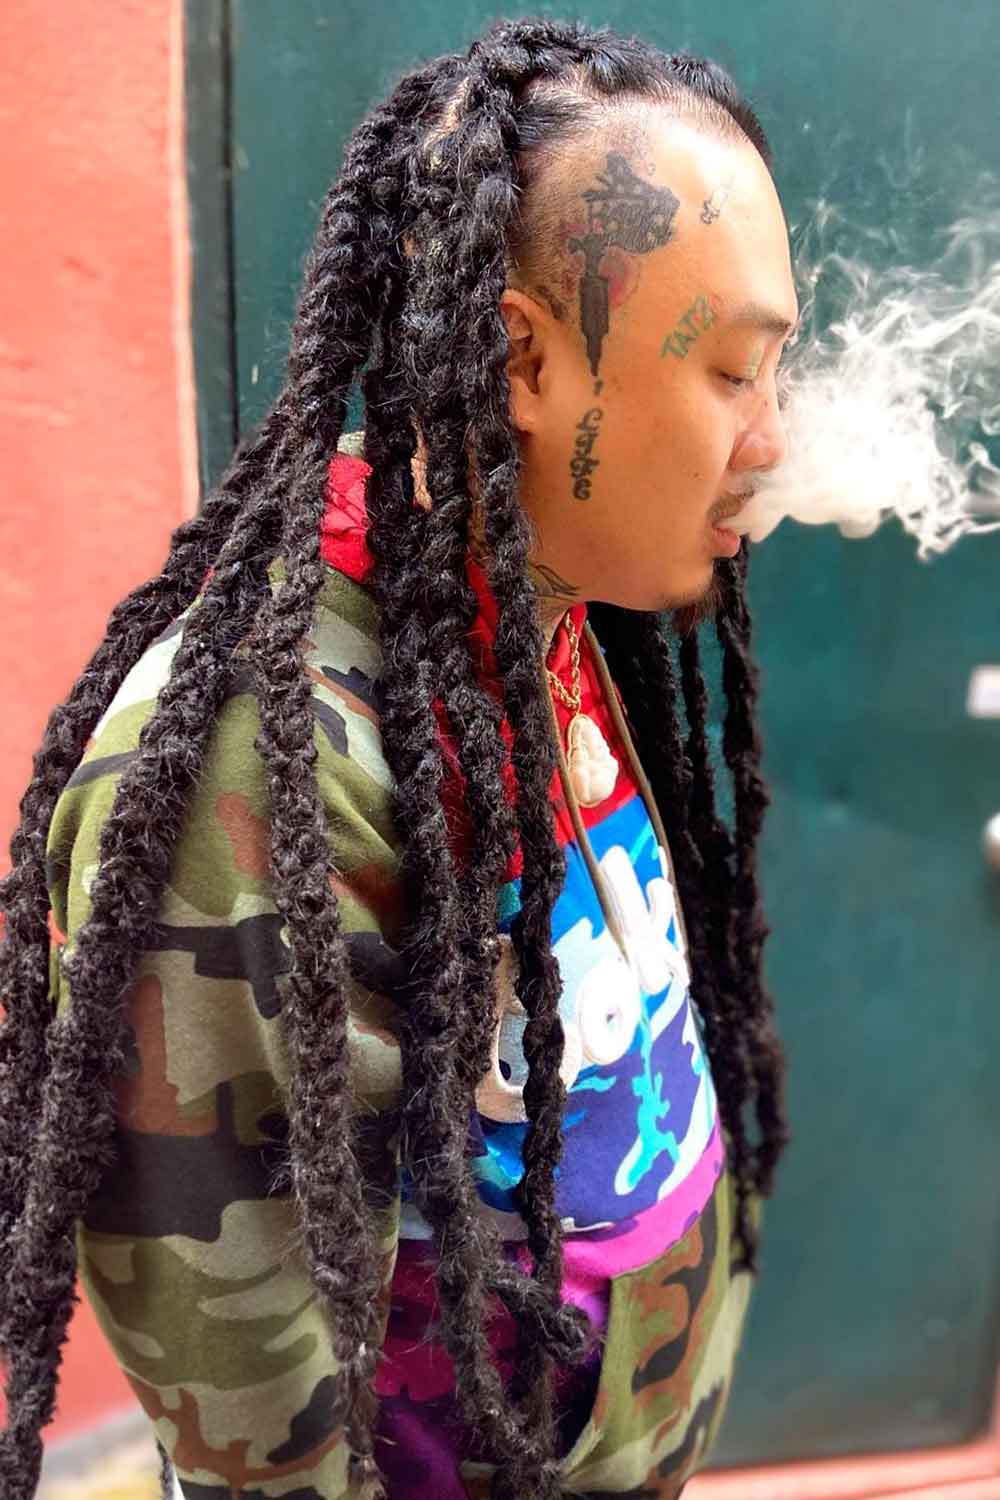 Asian With Dreads #asianhairstylesmen #asianhairstyles #asianhaircut #asianmen